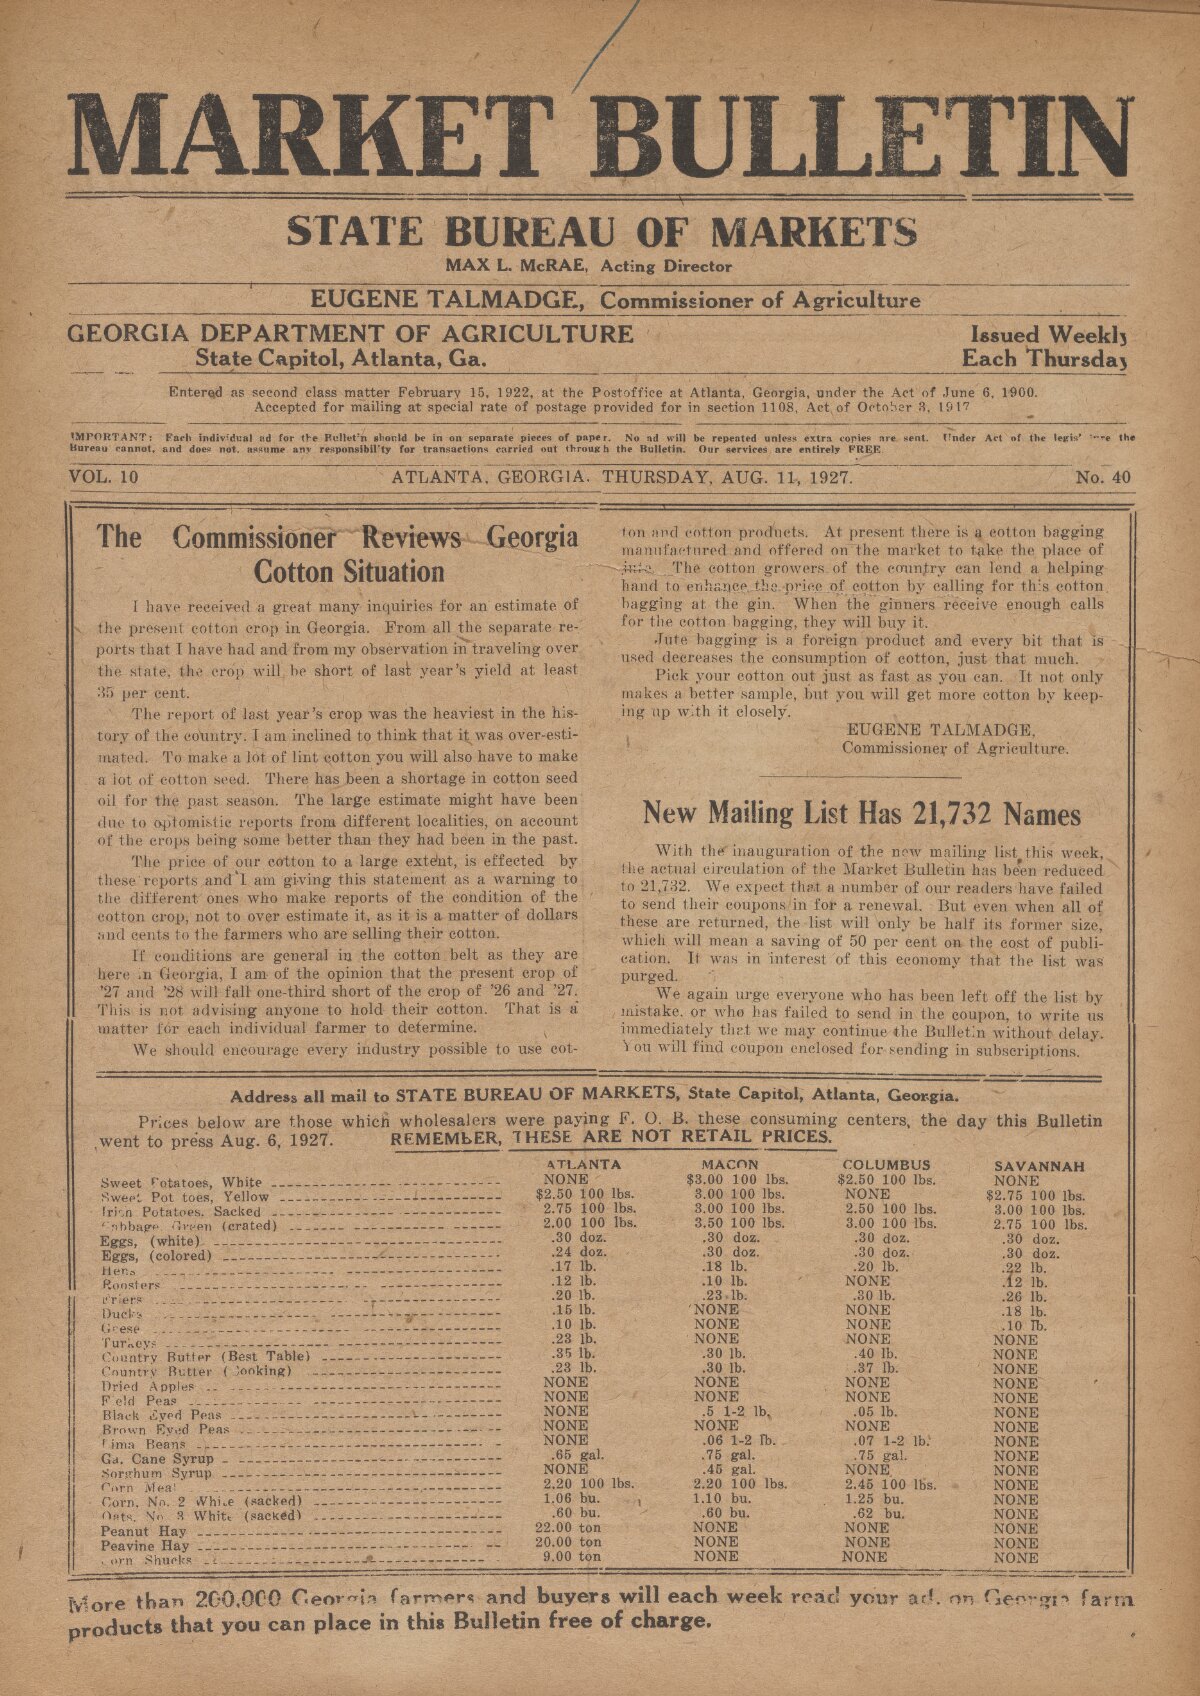 Farmers and consumers market bulletin, 1927 August 11 photo pic